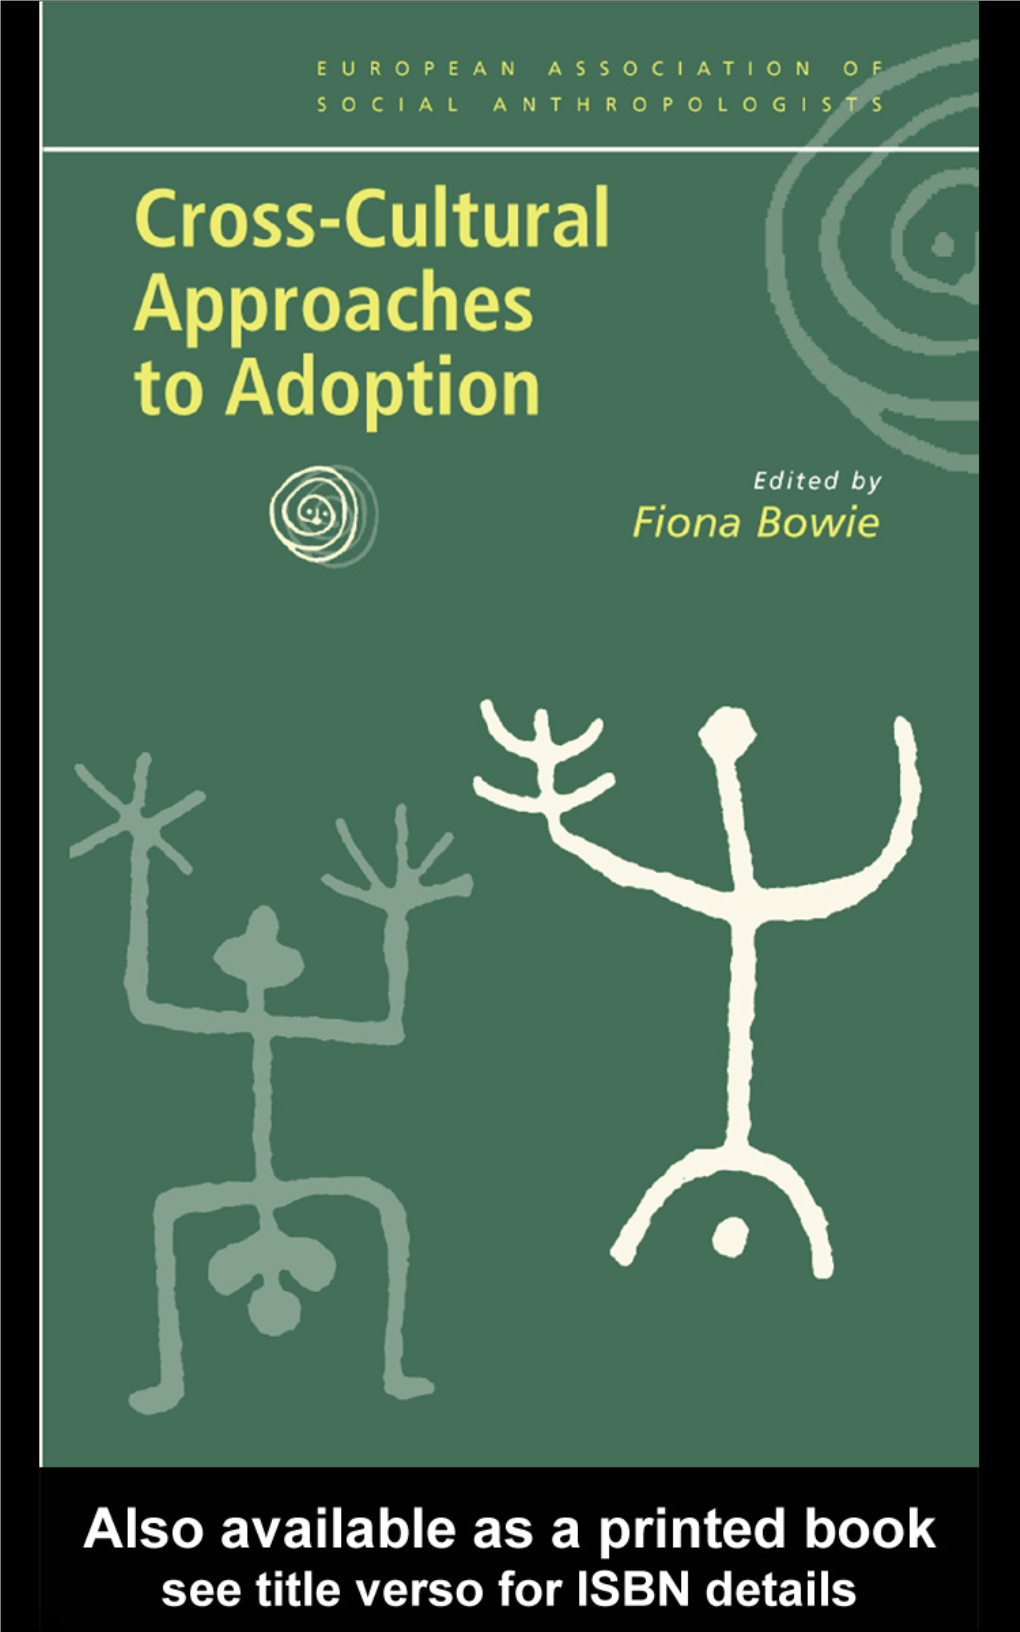 Cross-Cultural Approaches to Adoption